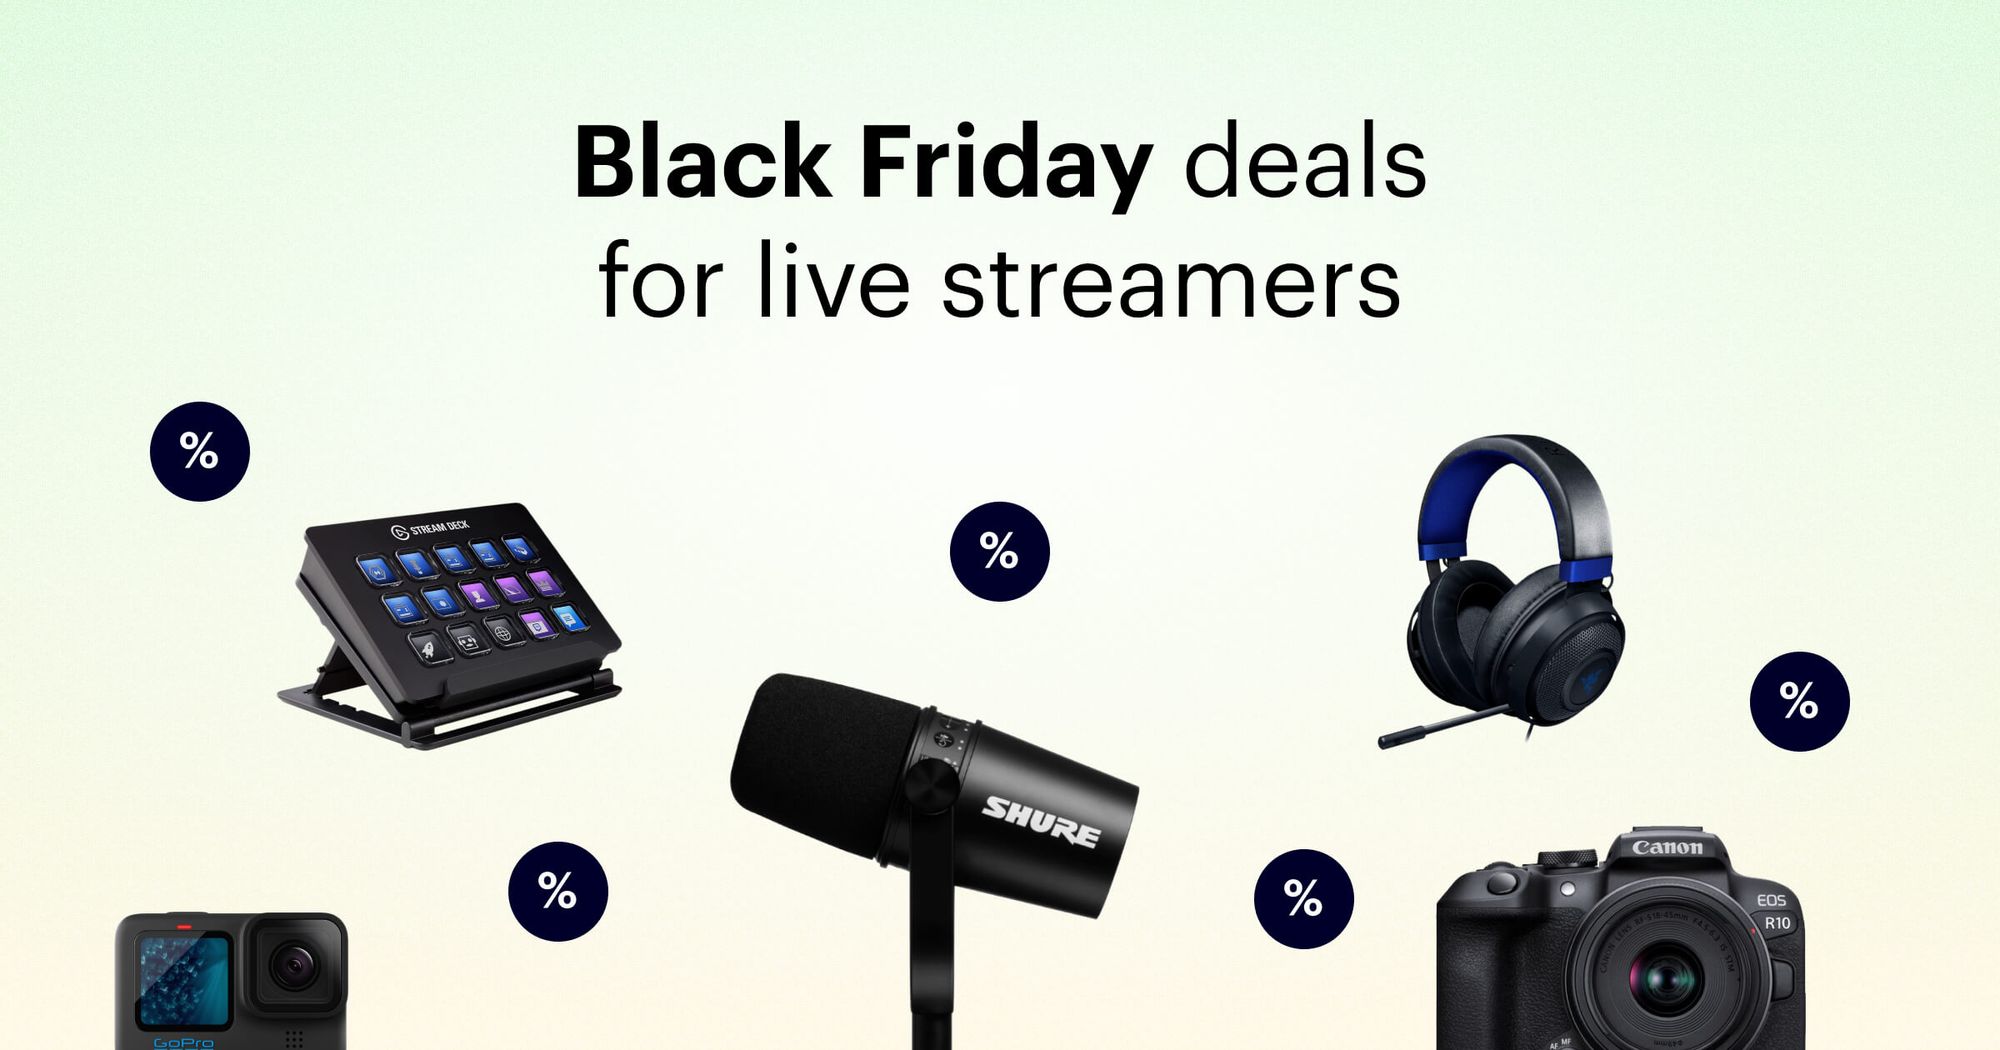 The best Black Friday deals for streamers